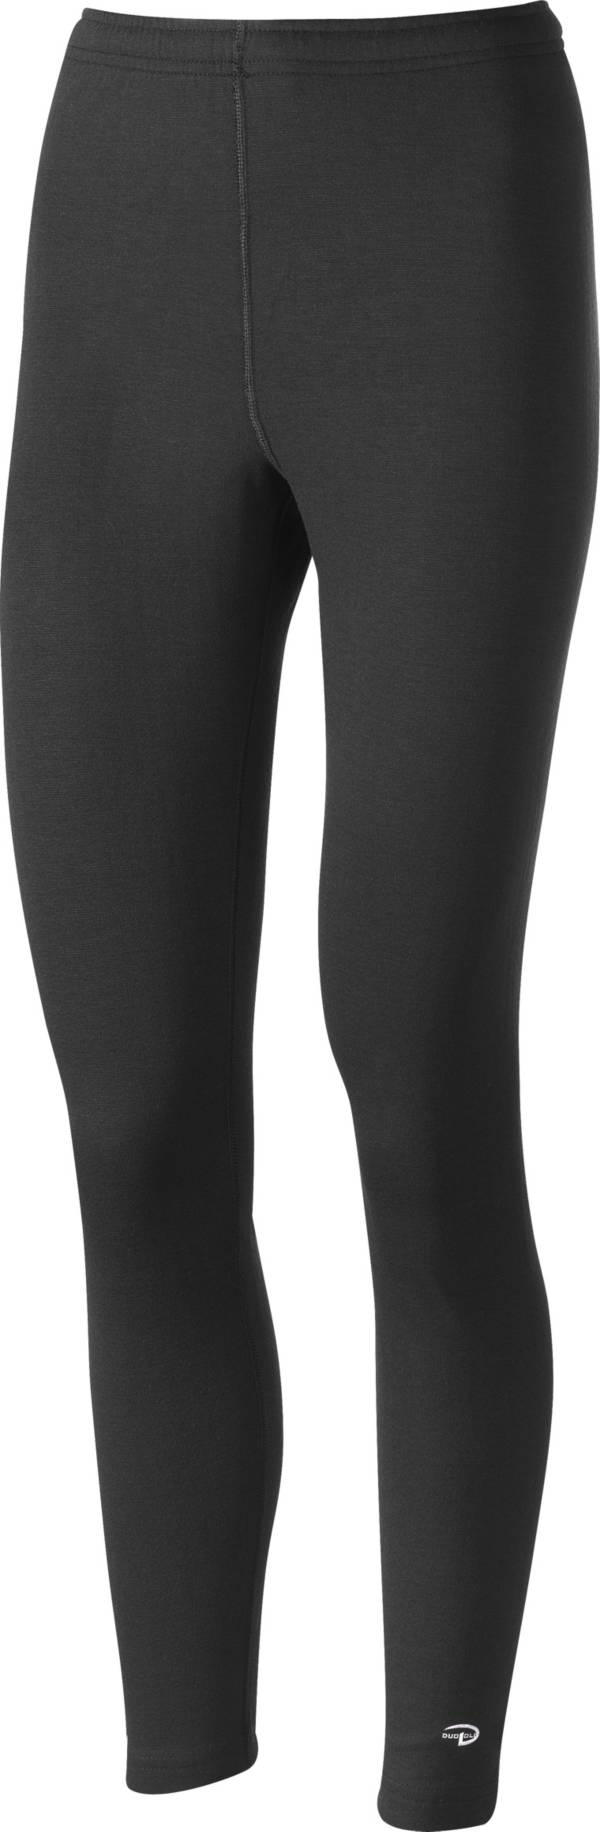 Duofold Women's Varitherm Expedition Pants product image